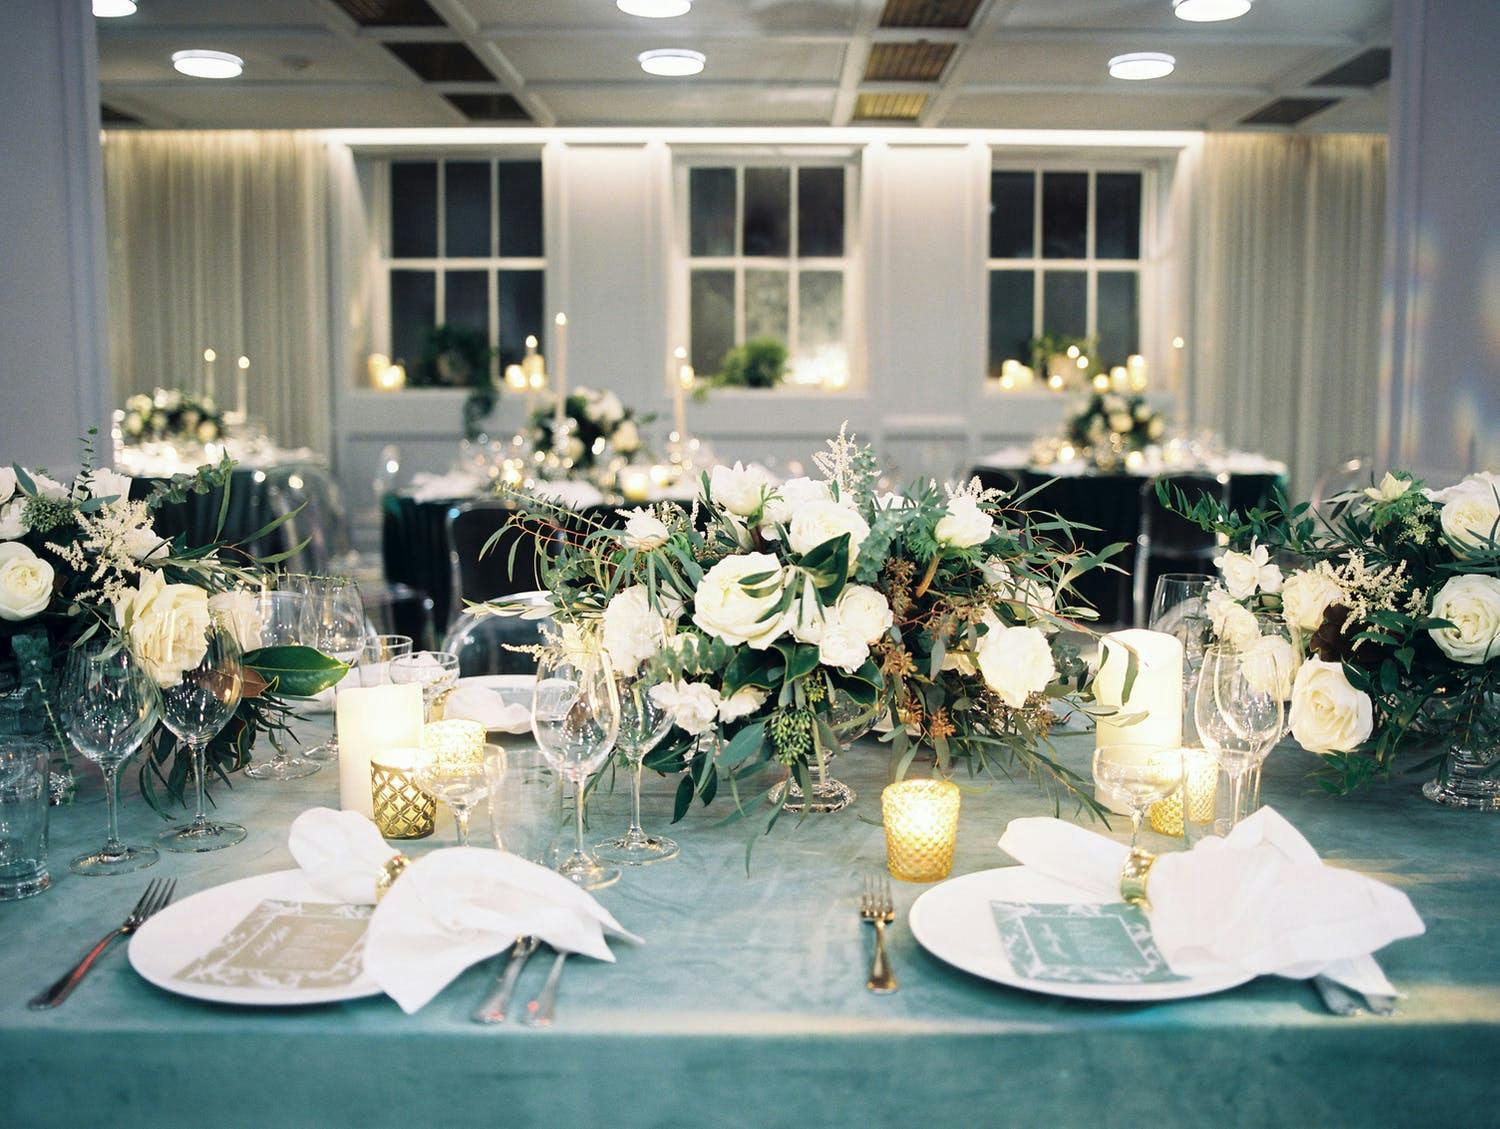 31 Winter Wedding Centerpieces That Will Make You Want an Off-Season  Wedding - PartySlate